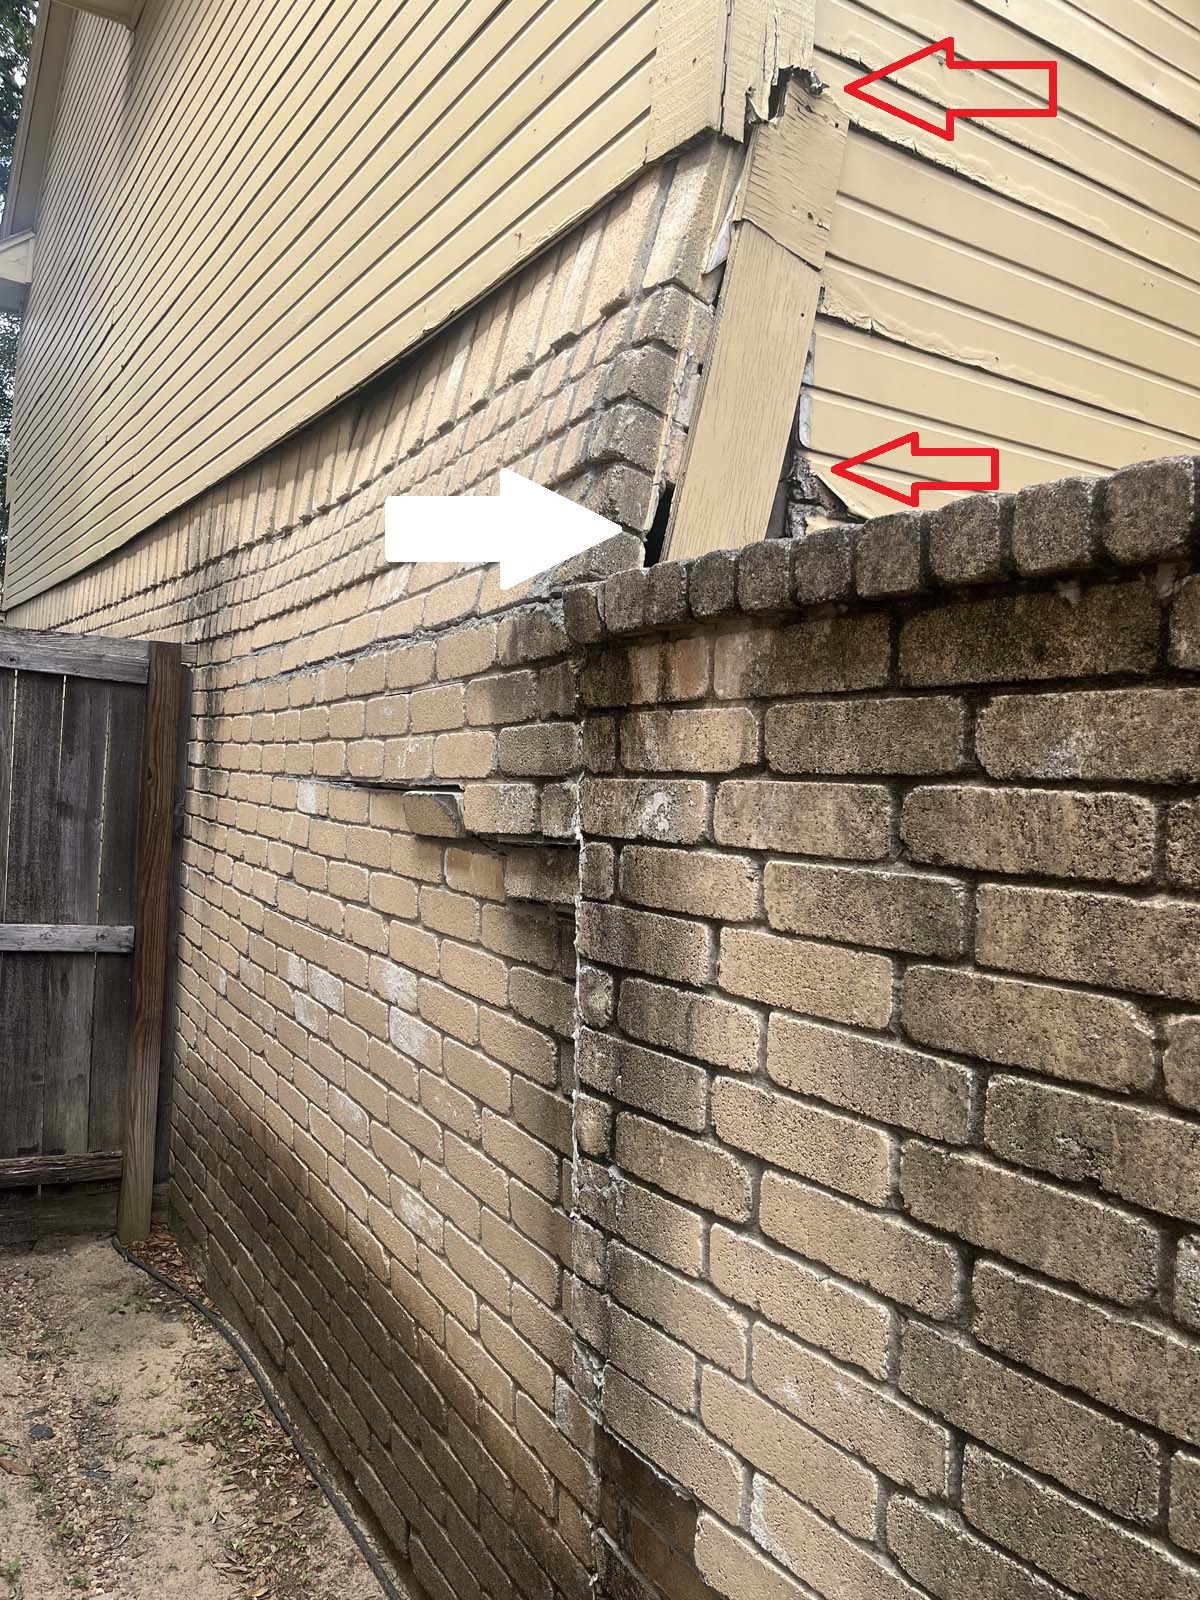 Sometimes home foundation damage is so severe that it causes structural issues with the house.